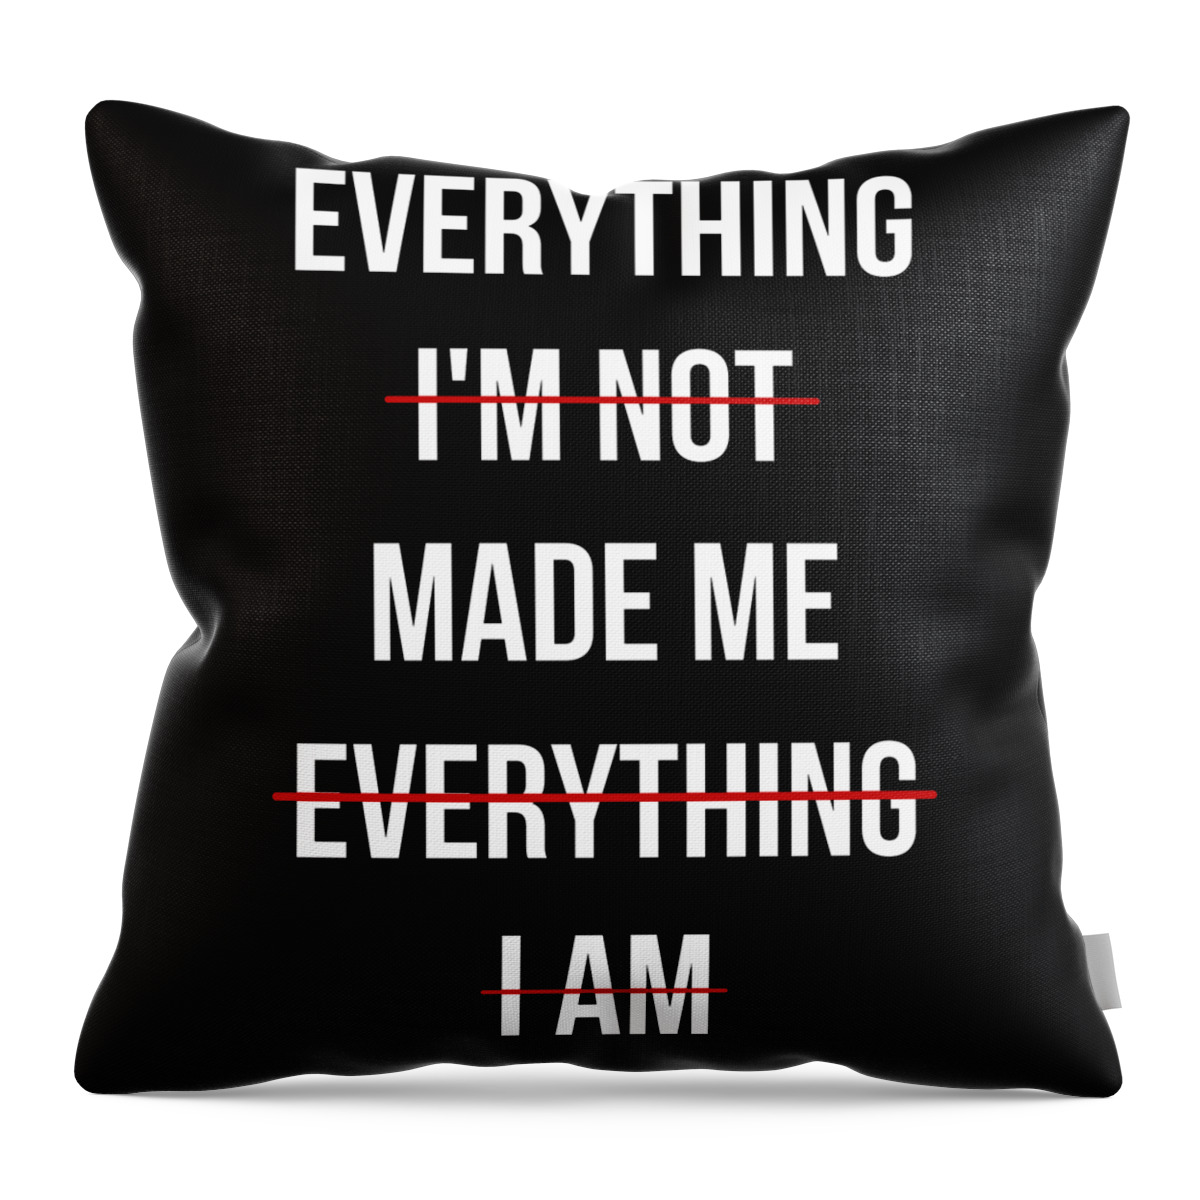 Funny Throw Pillow featuring the digital art Everything Made Me by Flippin Sweet Gear